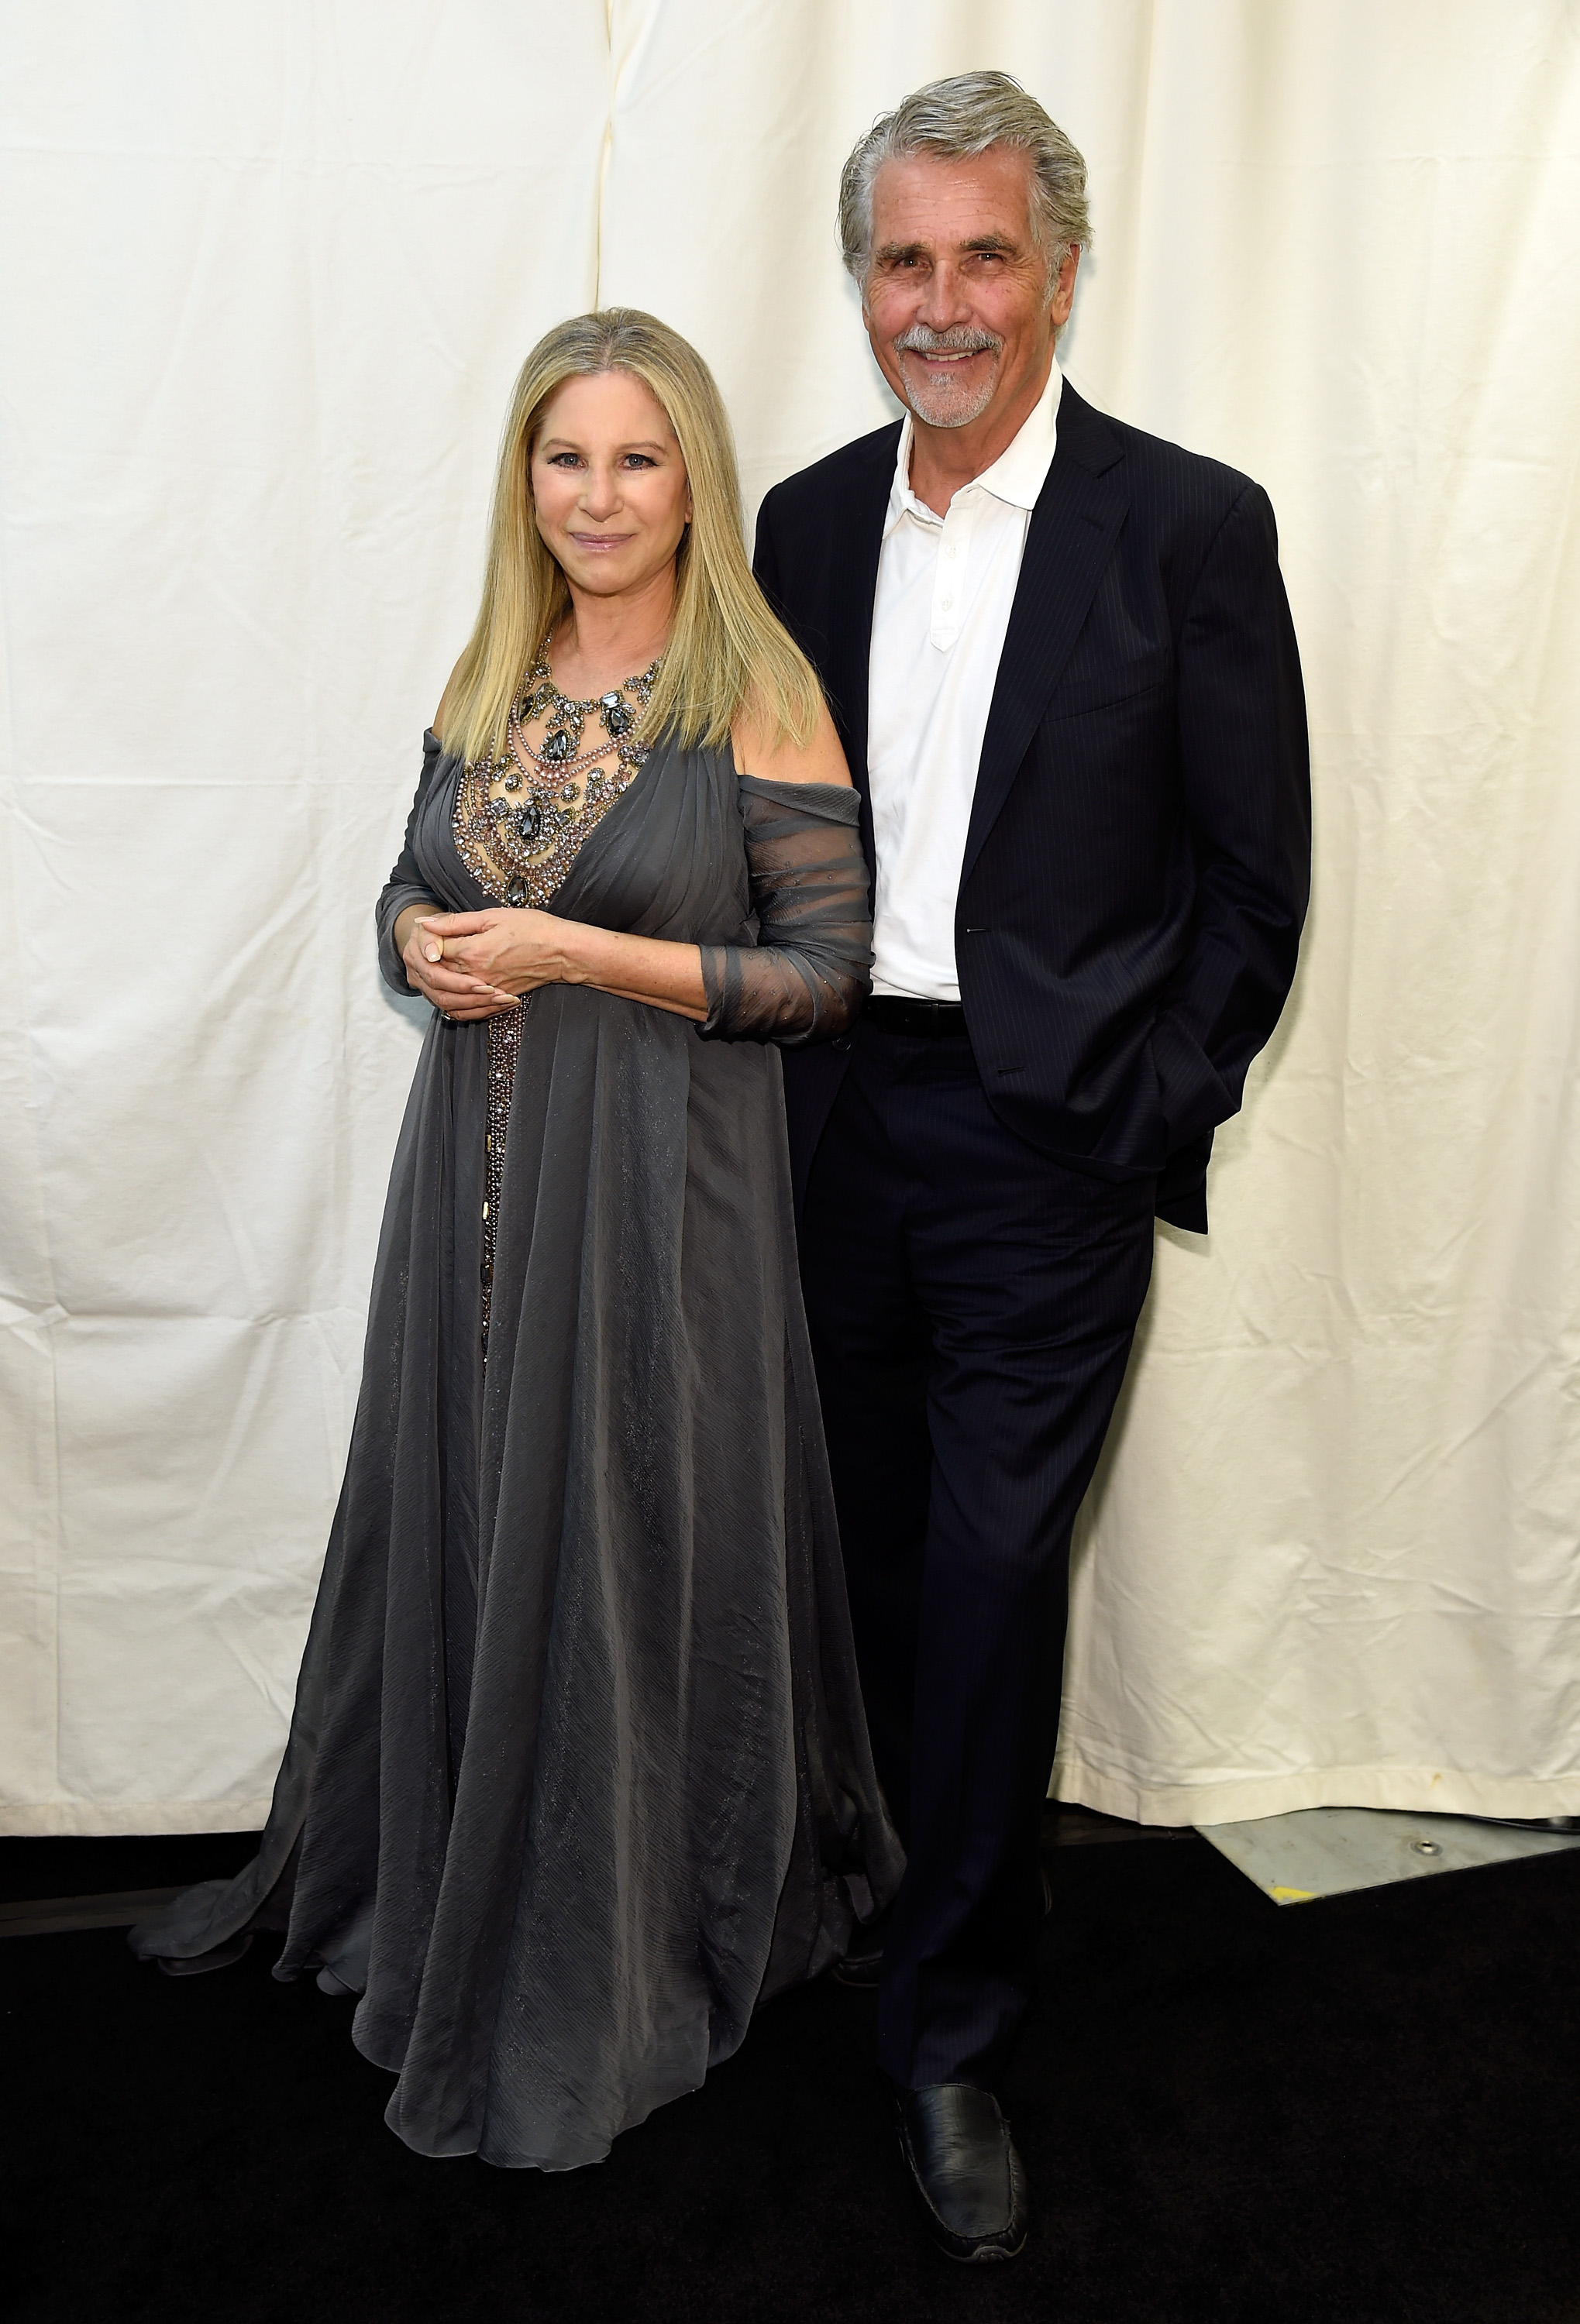 Barbra Streisand and James Brolin during the tour opener for "Barbra - The Music... The Mem'ries... The Magic!" on August 2, 2016 | Source: Getty Images